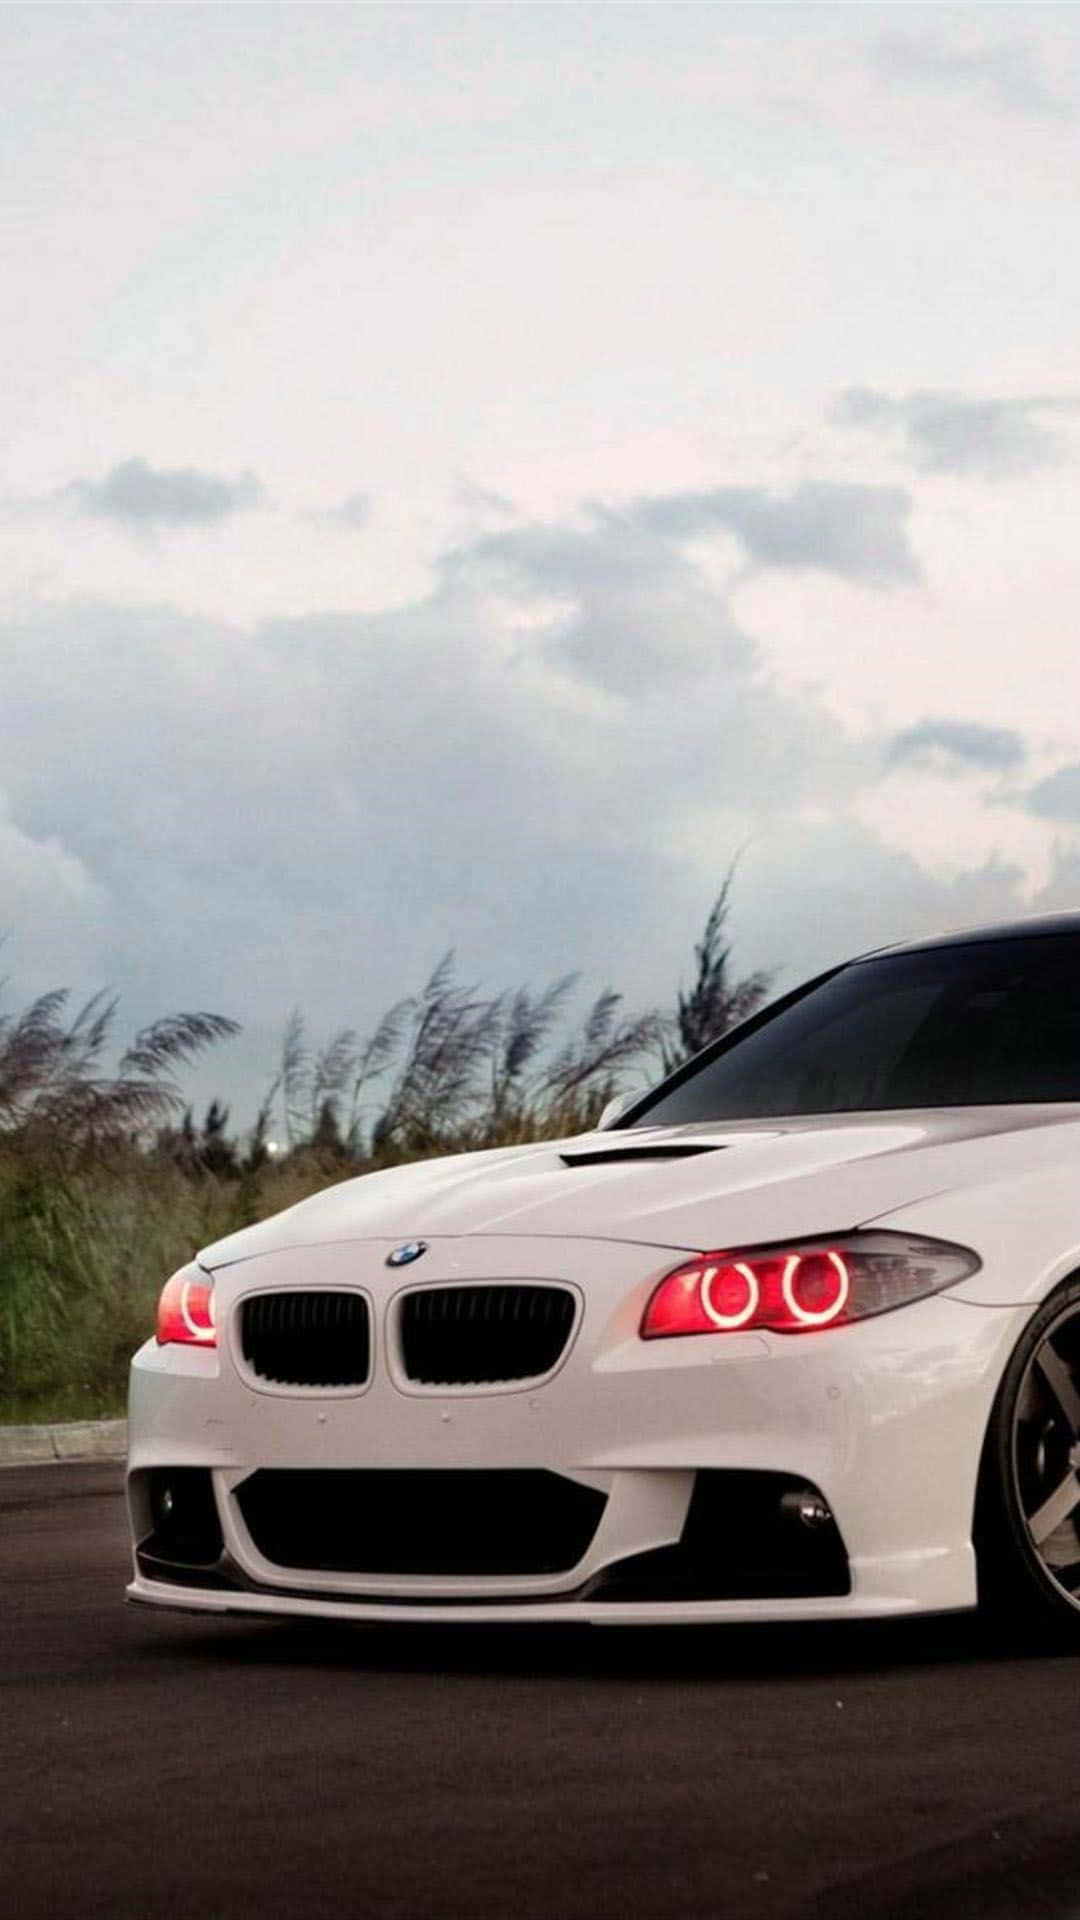 "Capture Landscapes with the Bmw Iphone" Wallpaper